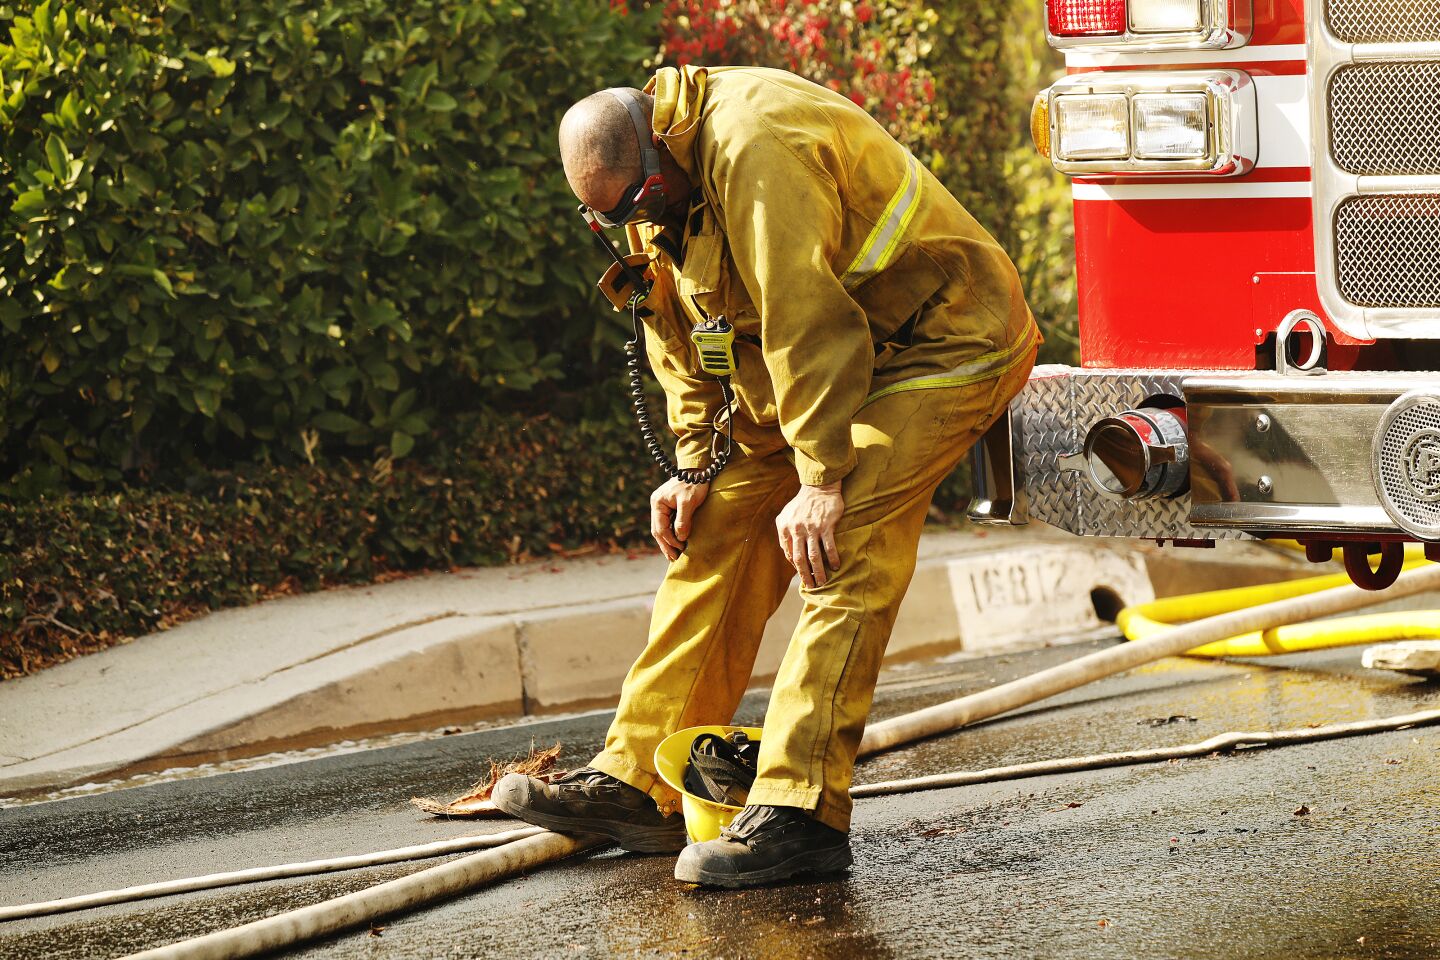 Brush fire threatens homes in Pacific Palisades